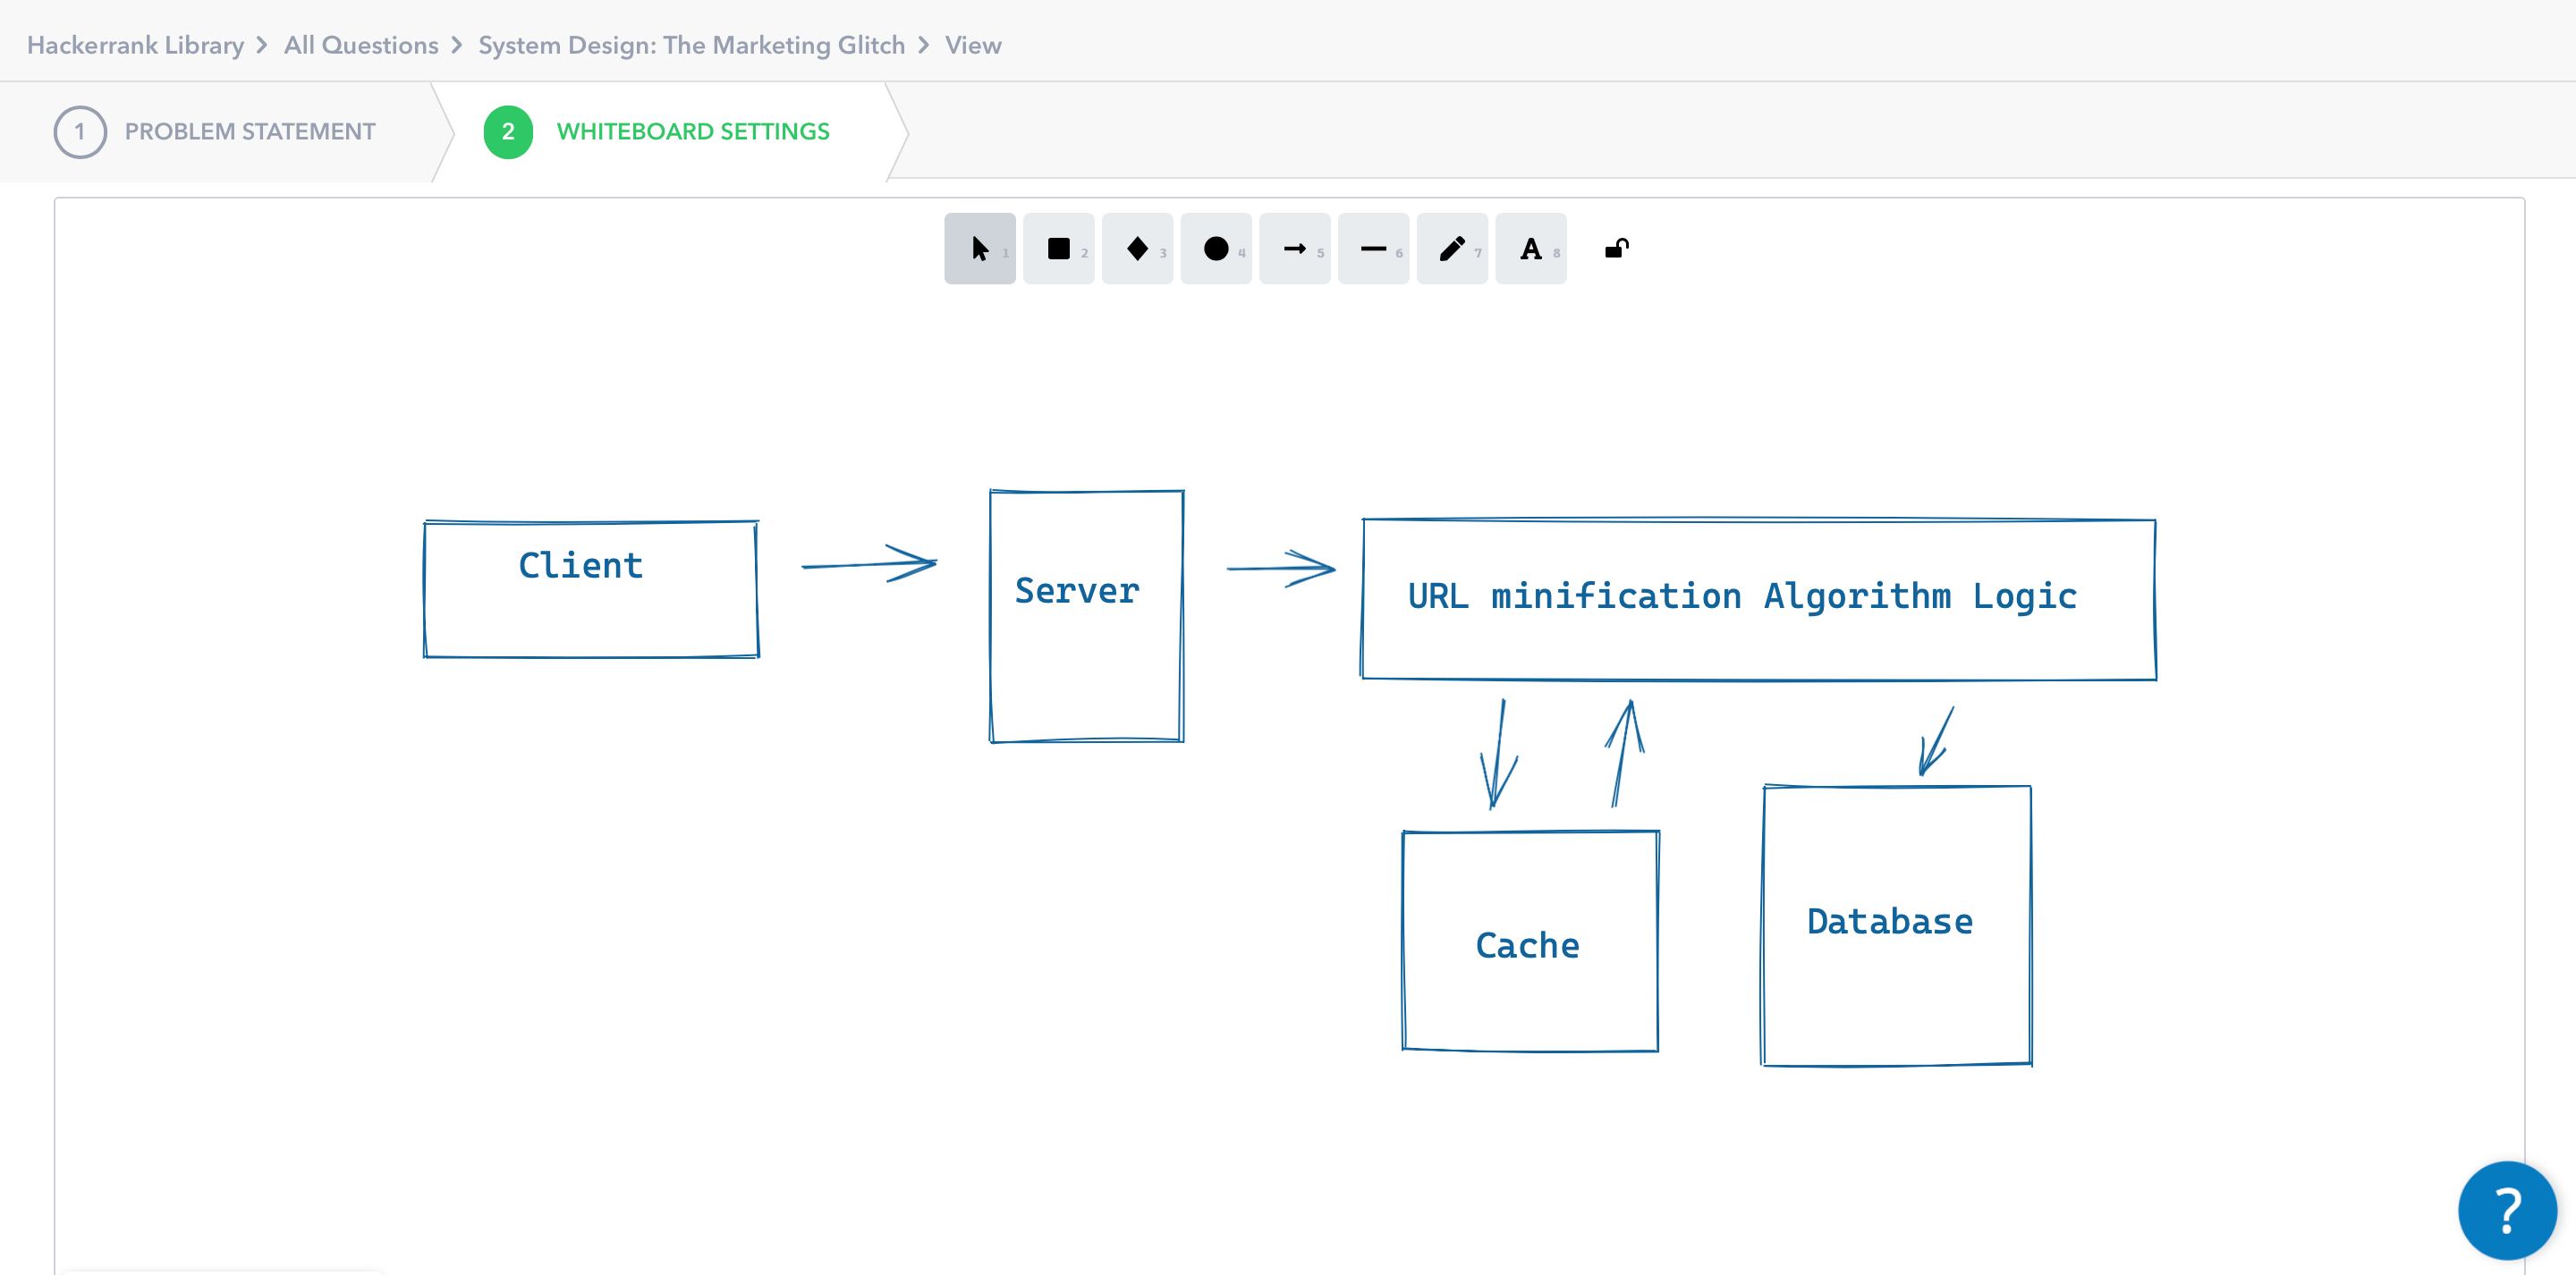 Whiteboard settings of the "System Design: The Marketing Glitch" question in the Hackerrank library